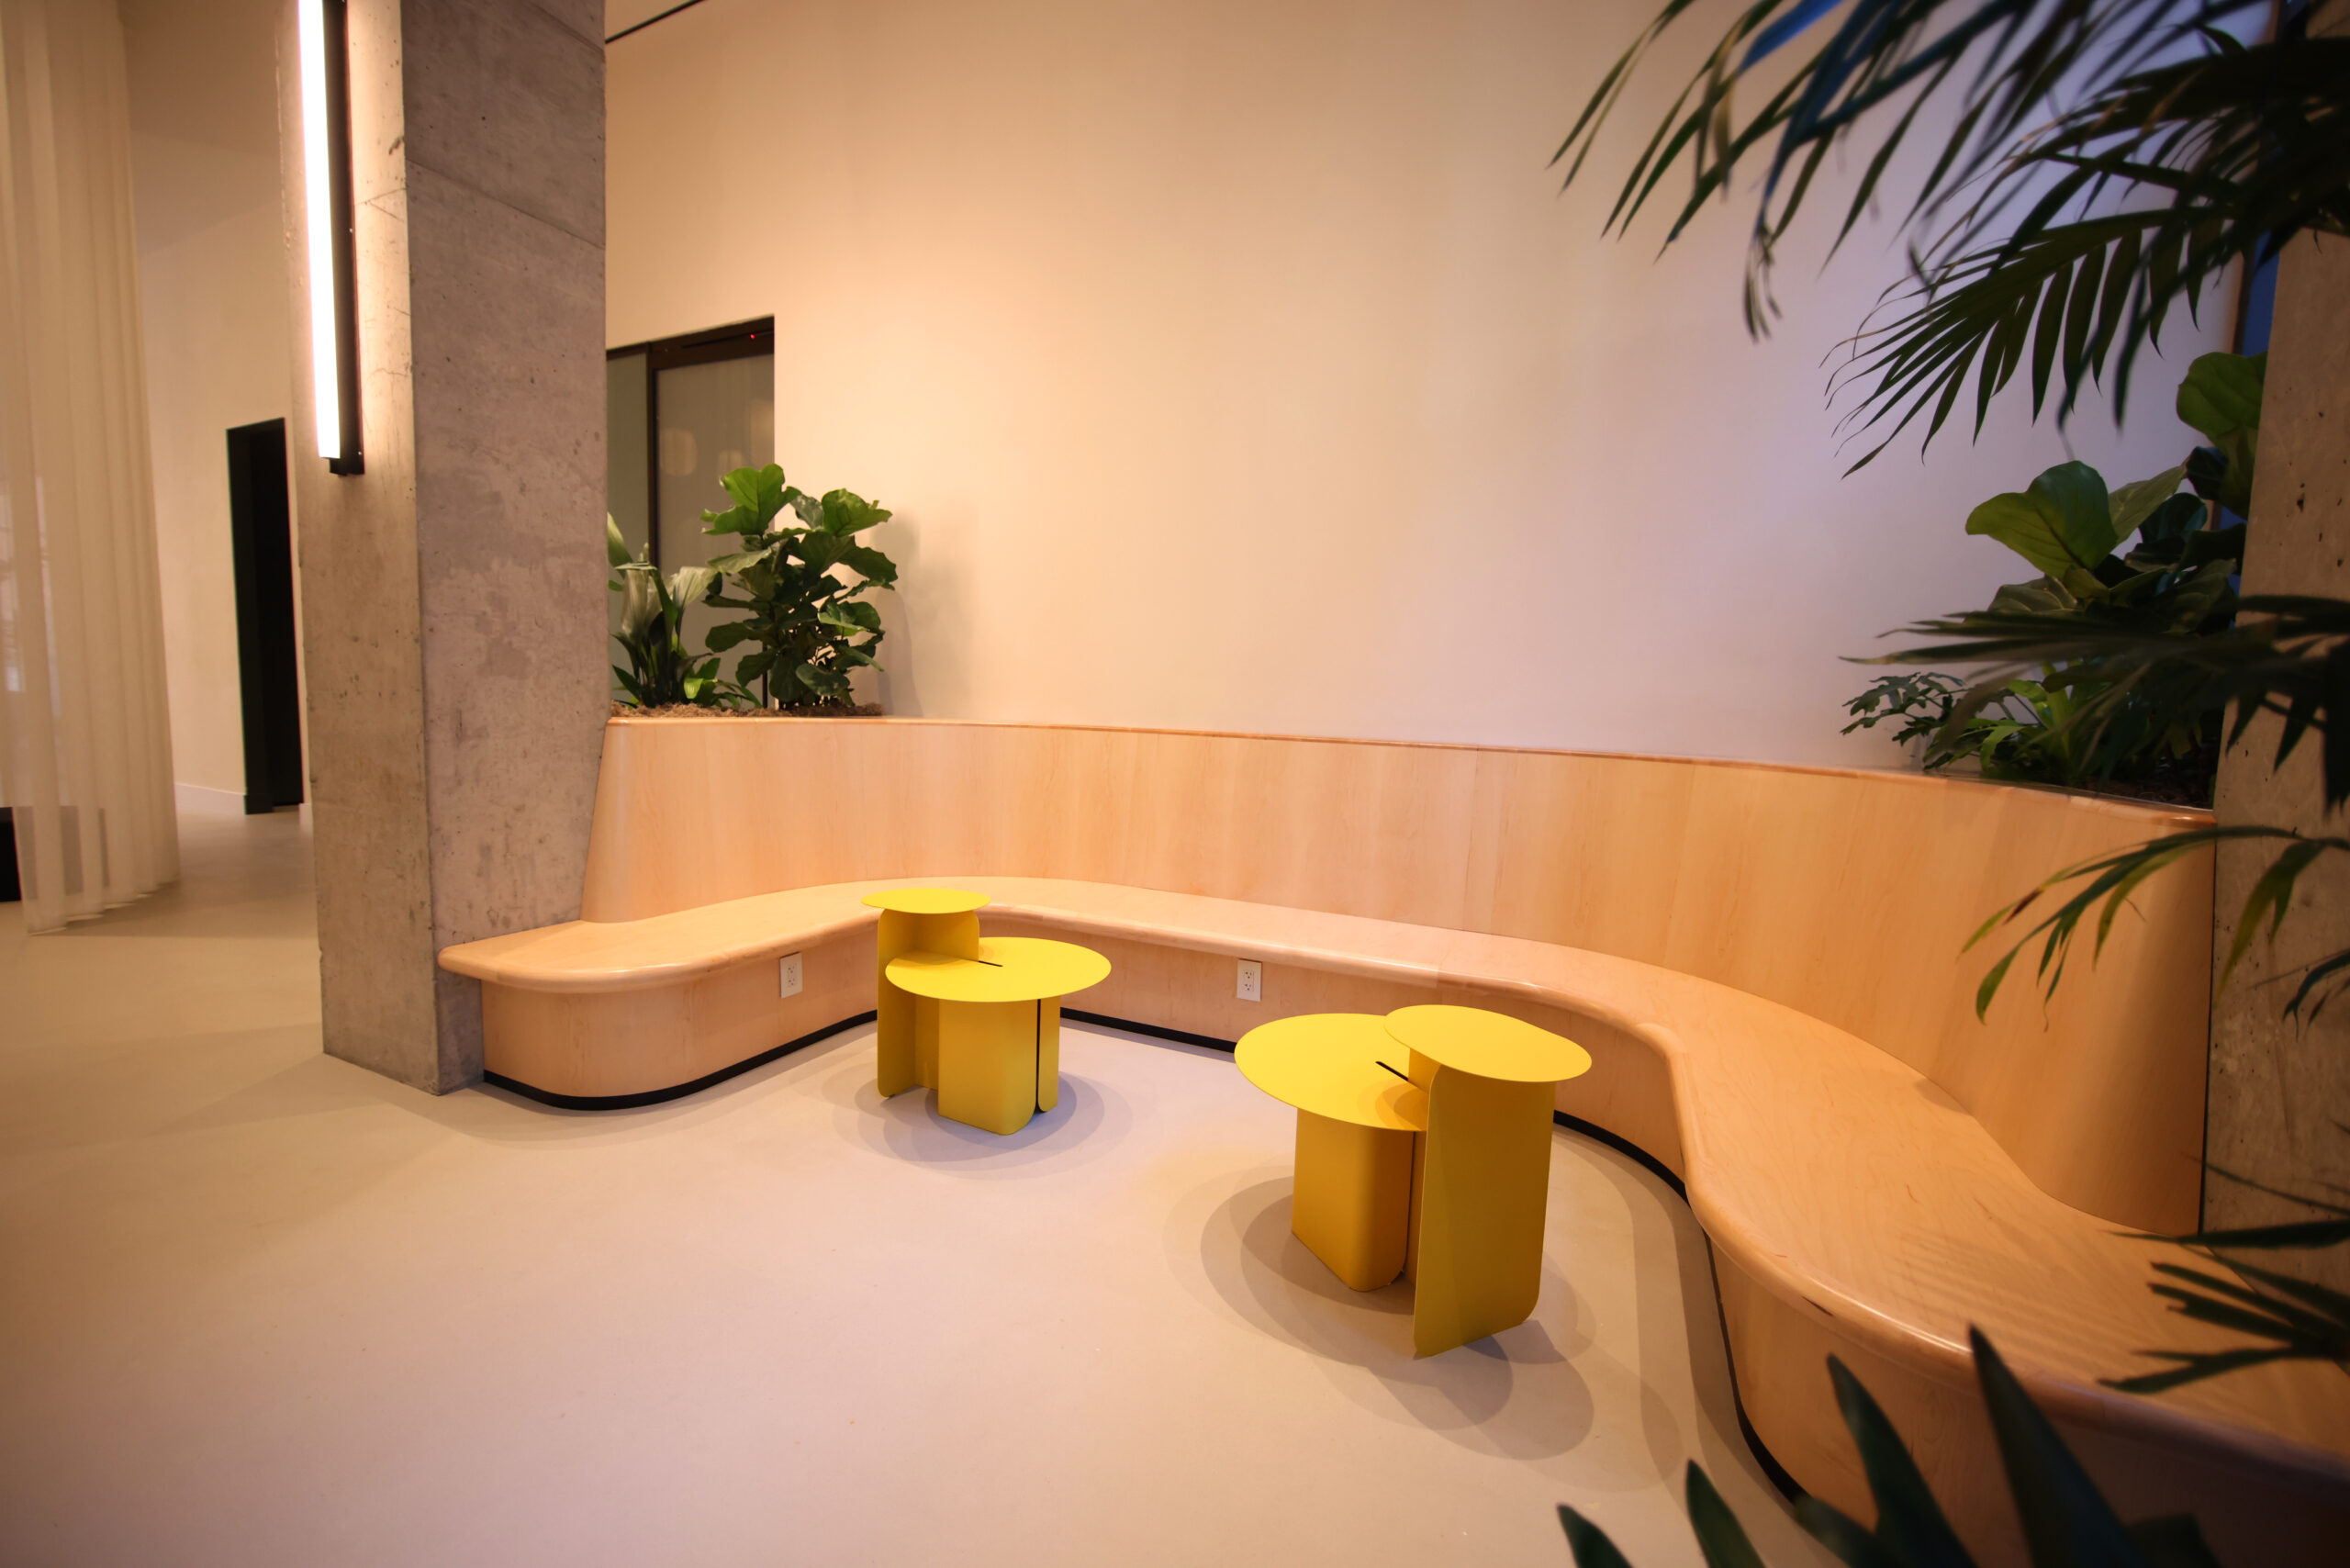 A wood table, plants and yellow seats